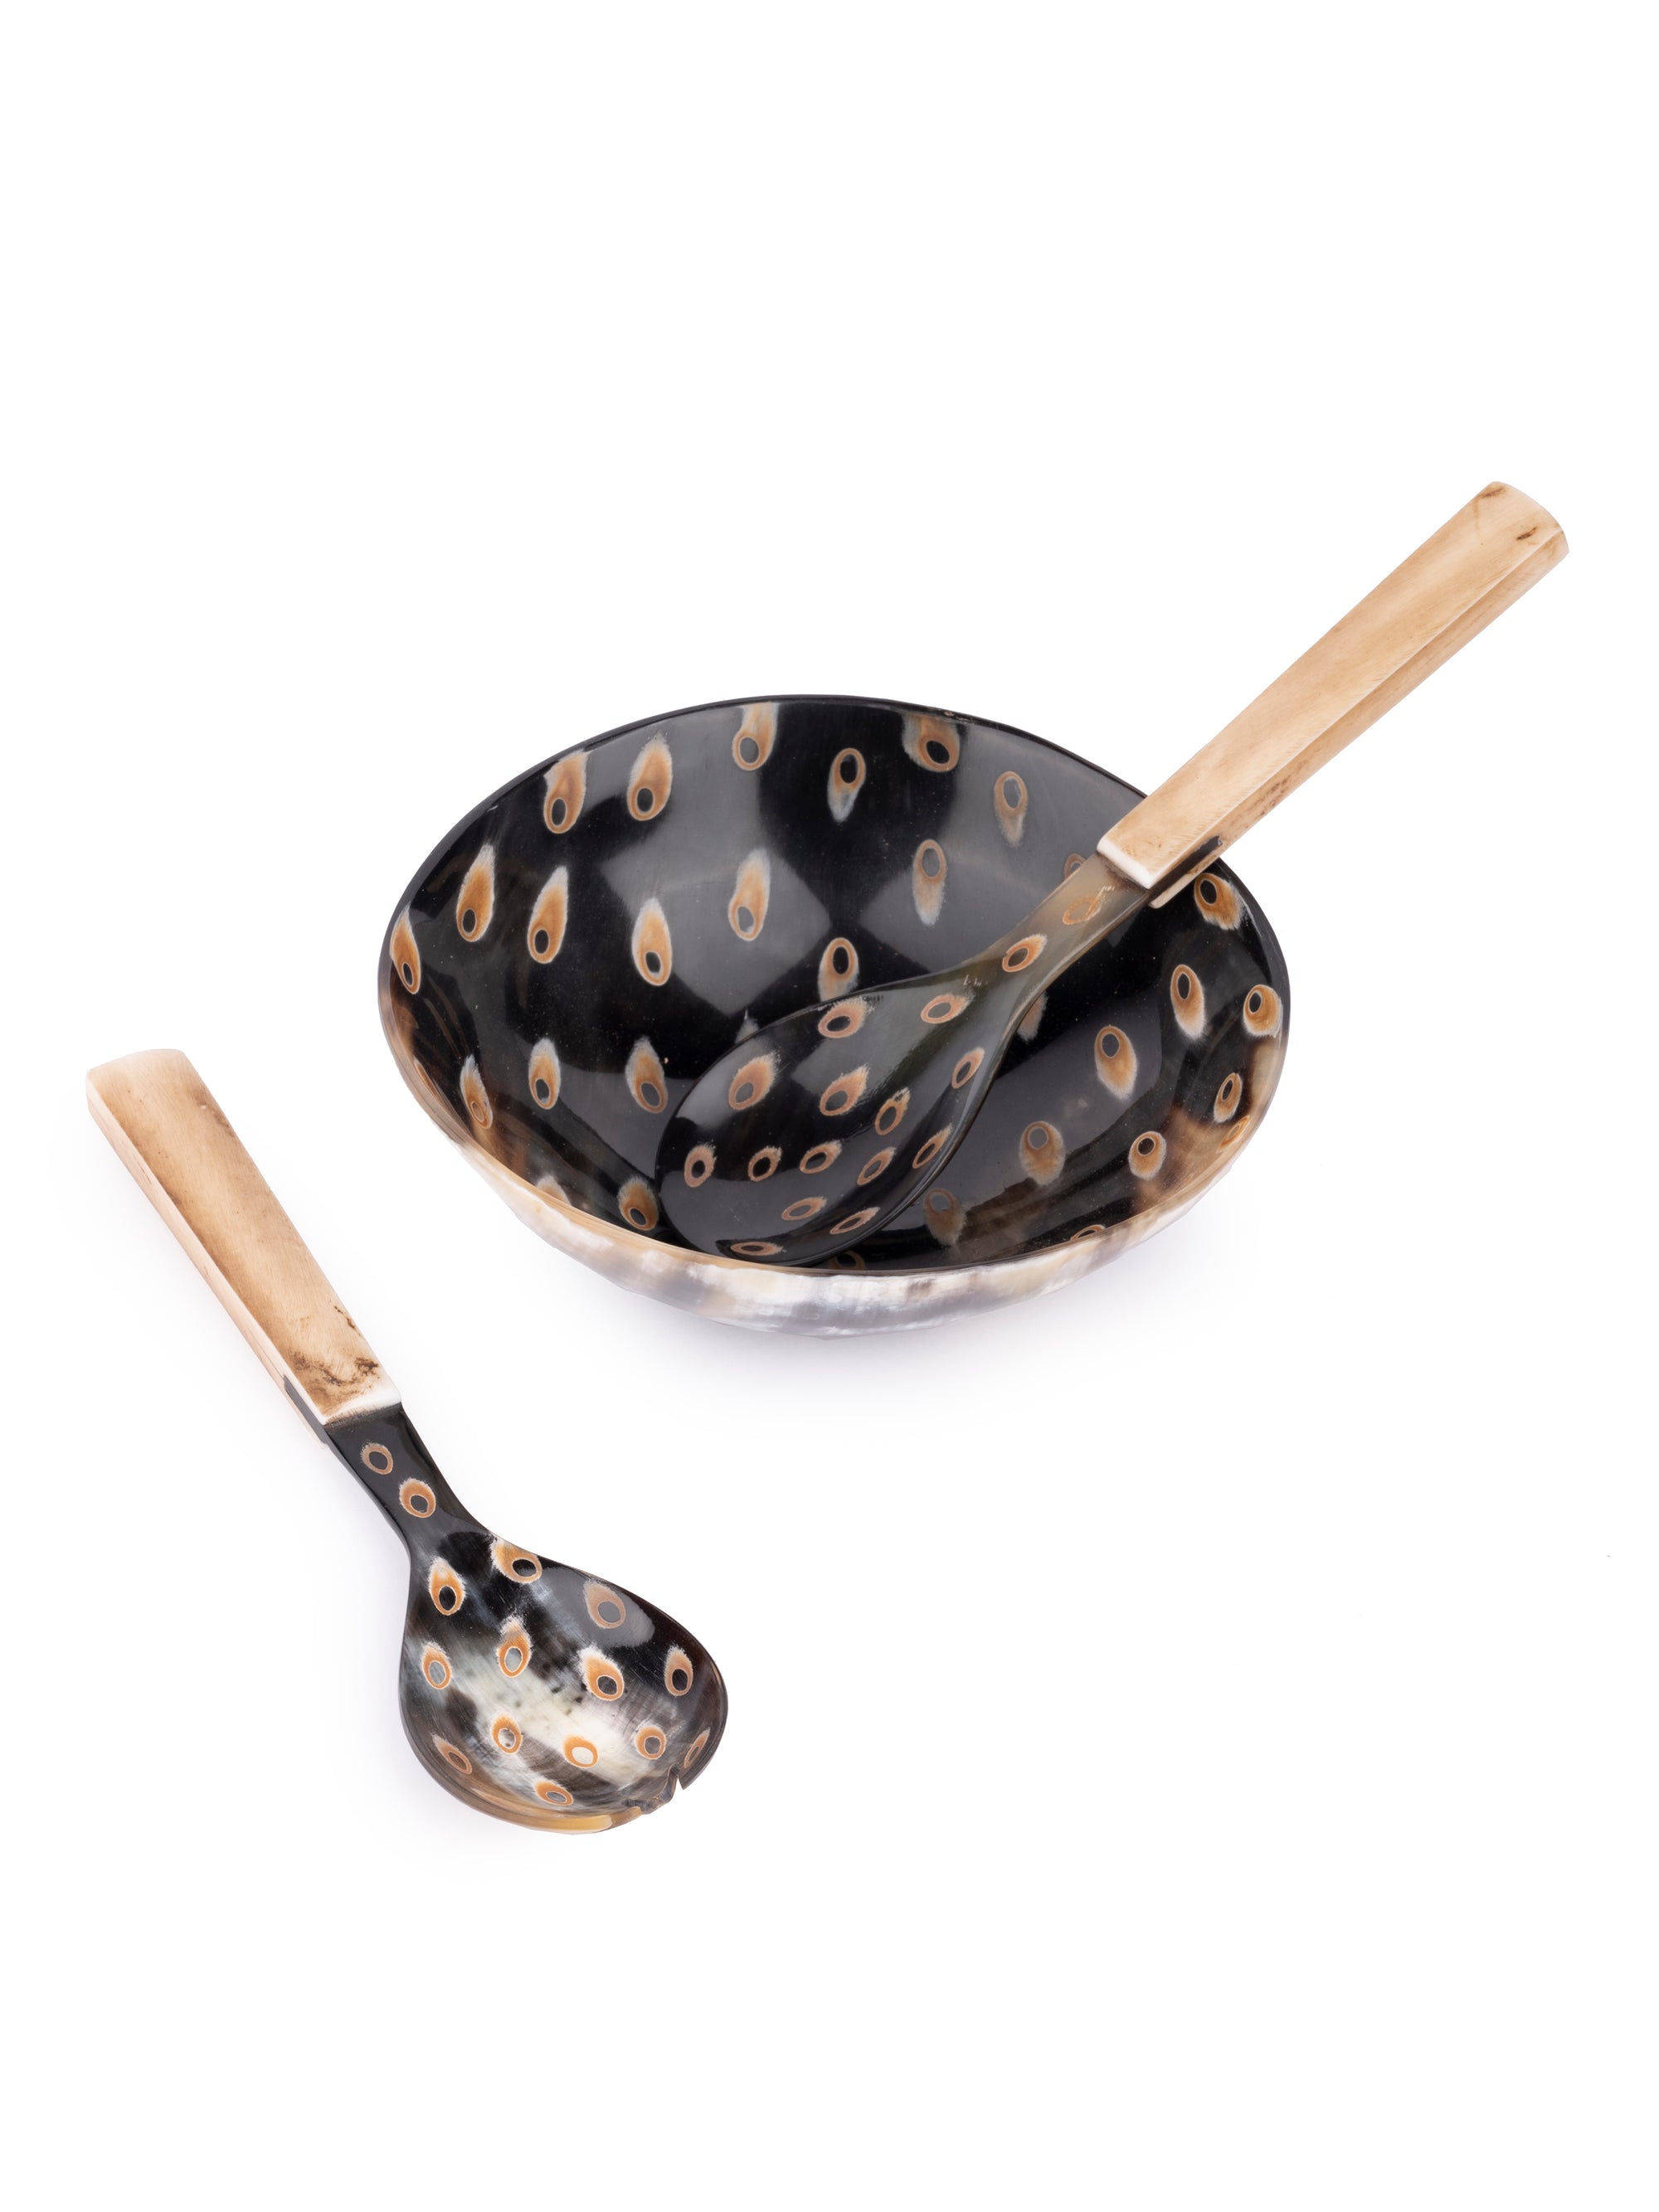 Natural Buffalo Horn Dotted Serving Bowl With Spoon and Fork Set - 6 inches dia - The Heritage Artifacts